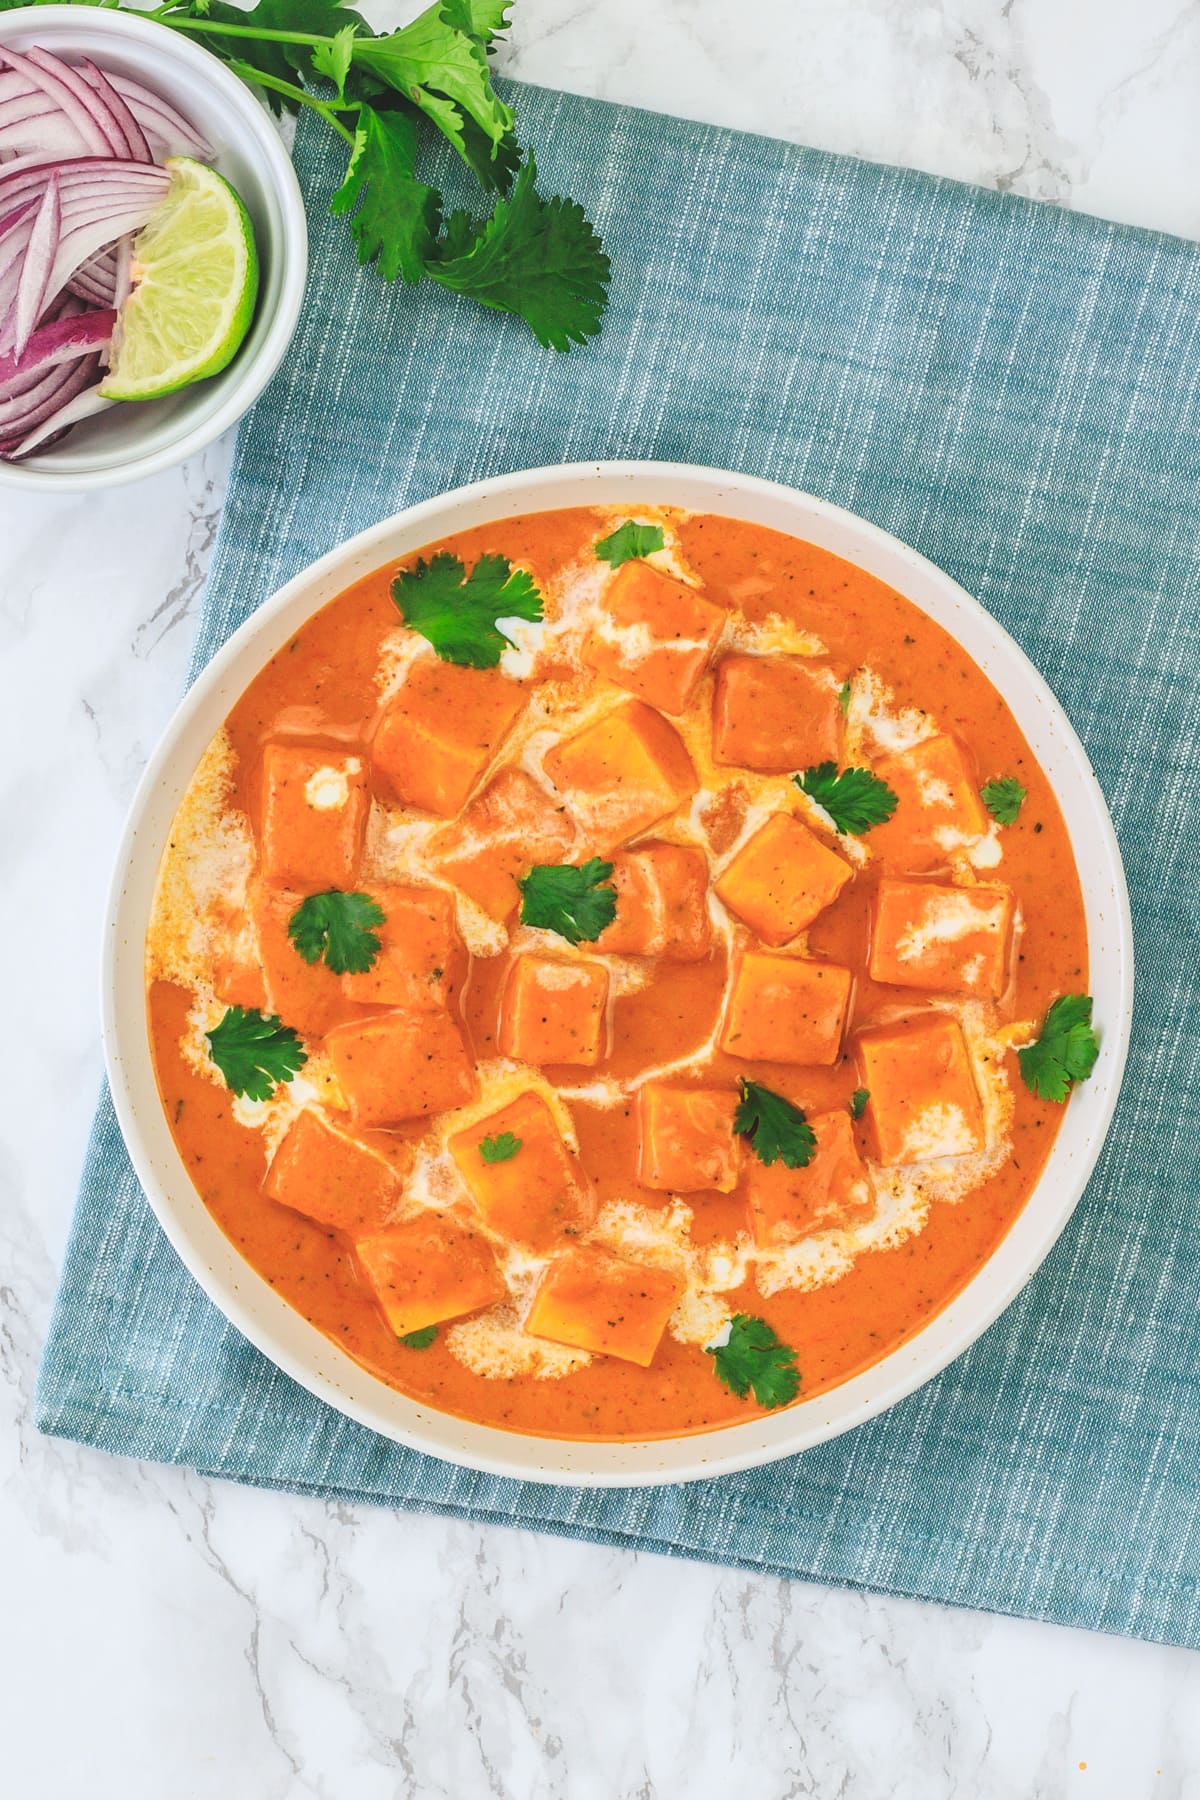 Top view of paneer makhani served in a wide bowl with napkin underneath.